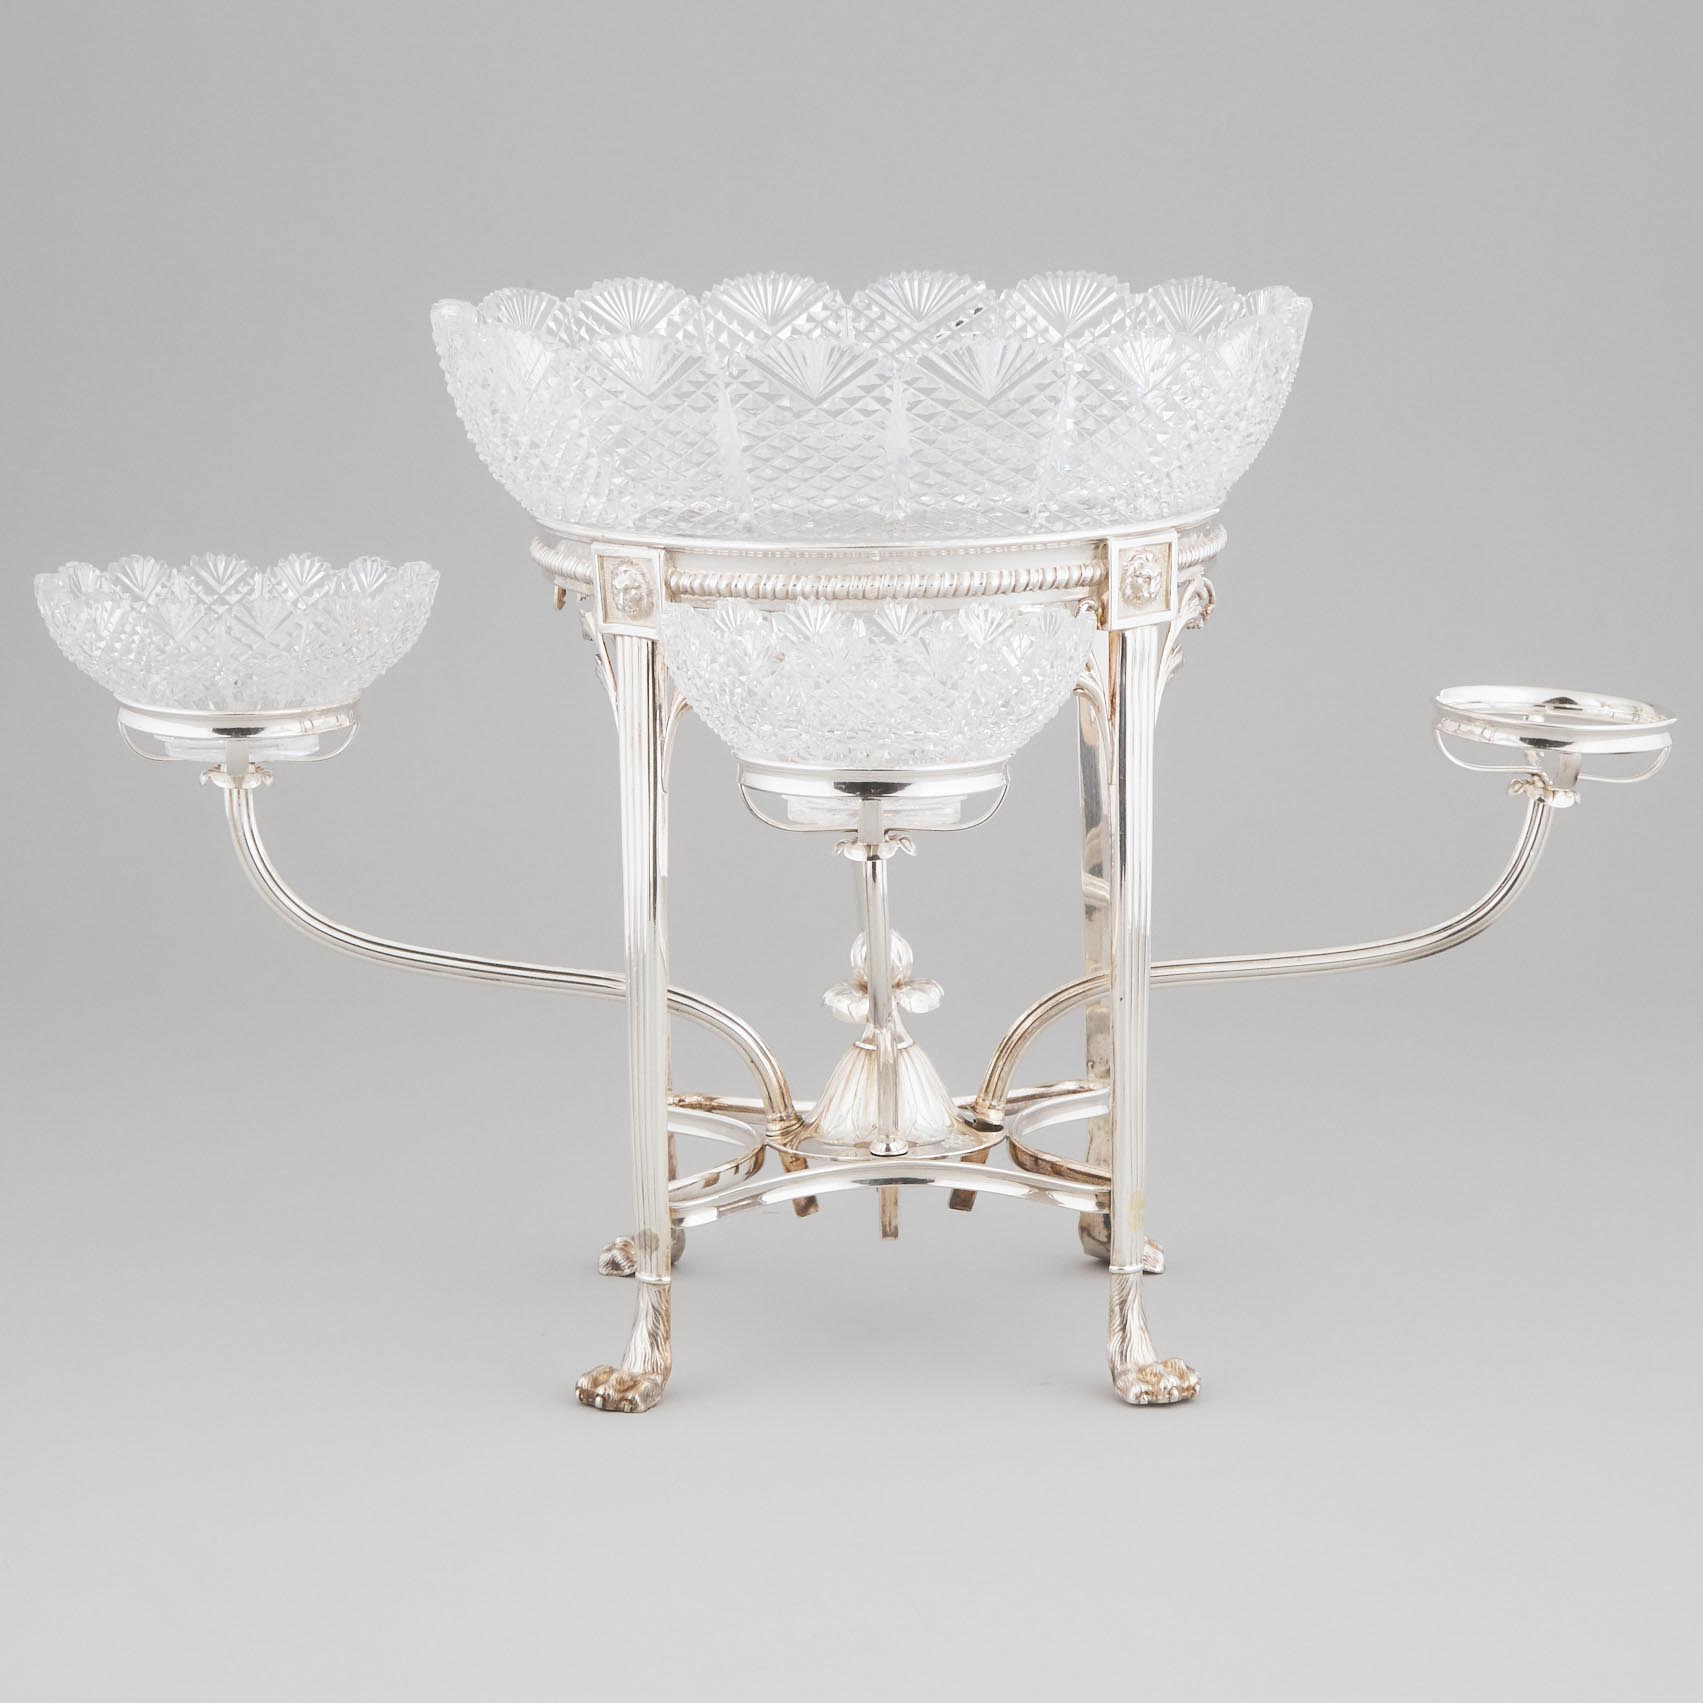 George III Silver and Cut Glass Epergne, Matthew Boulton, 1802